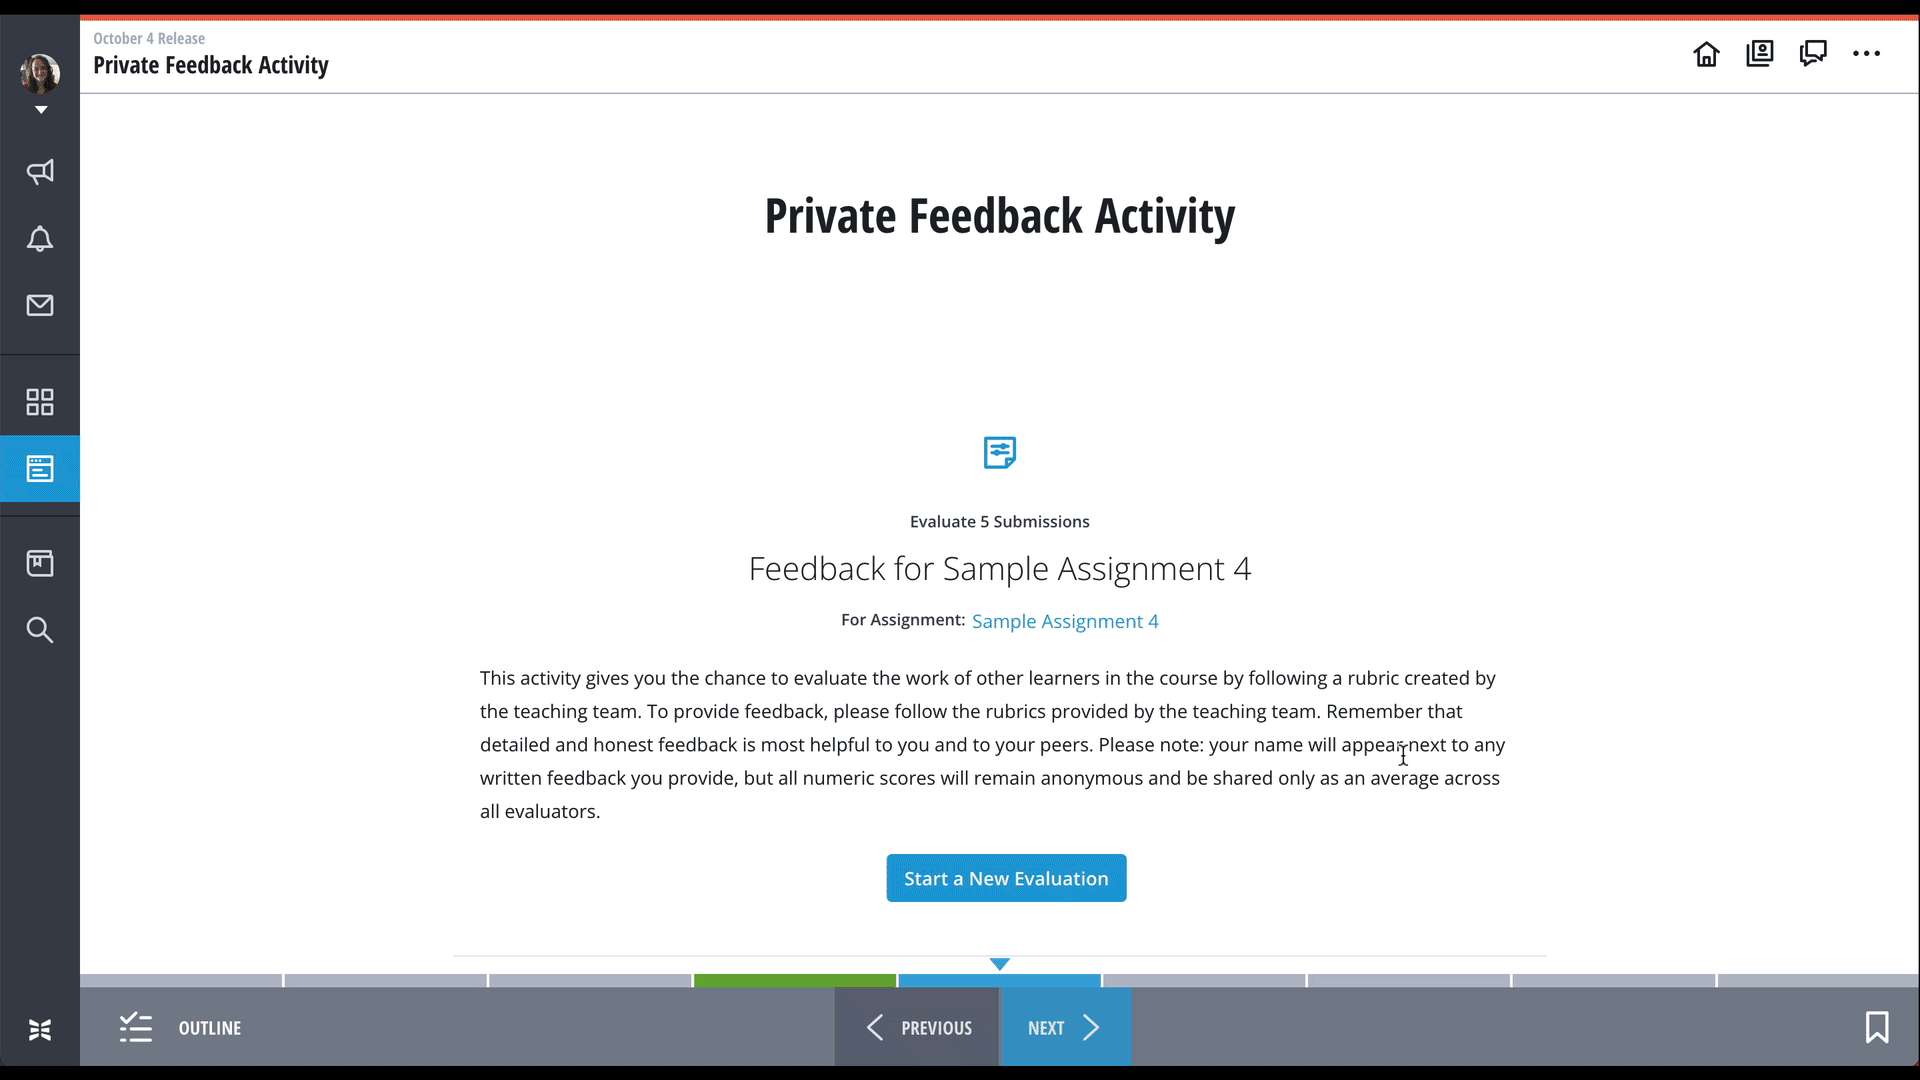 PrivateFeedbackActivity-Submission.gif